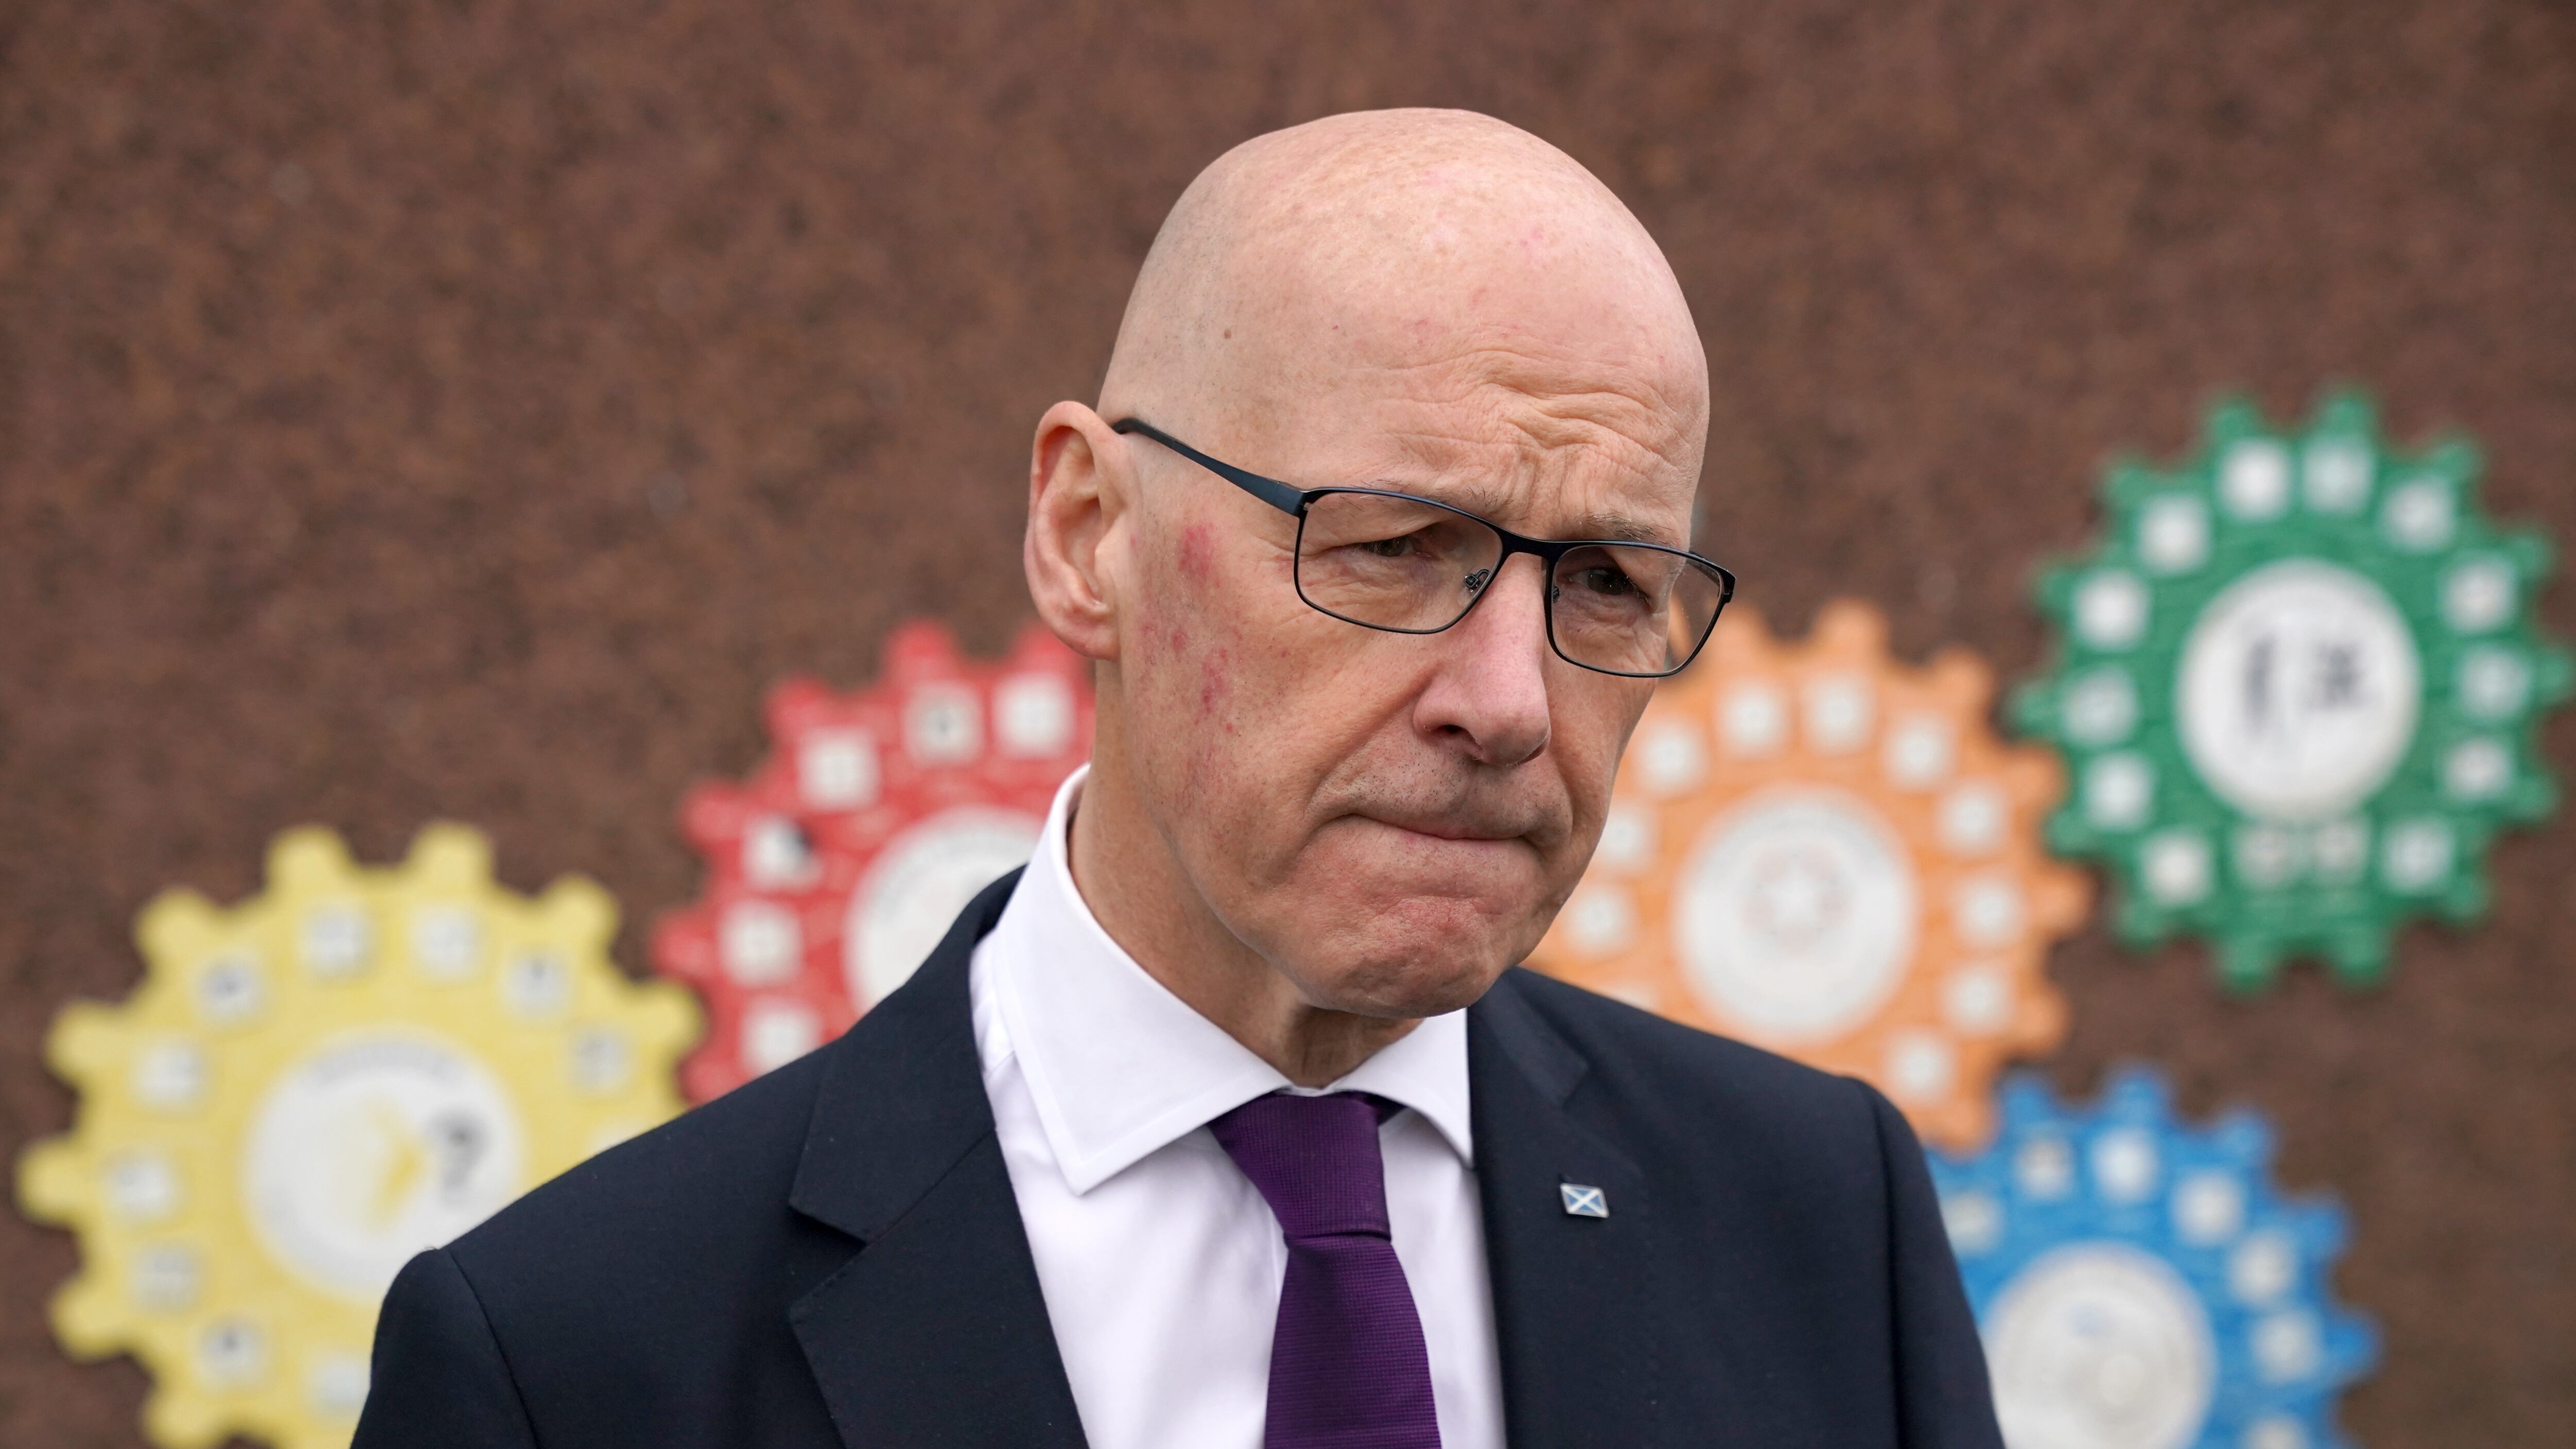 The general election will mark an early electoral test for John Swinney – who only returned as SNP leader earlier in May